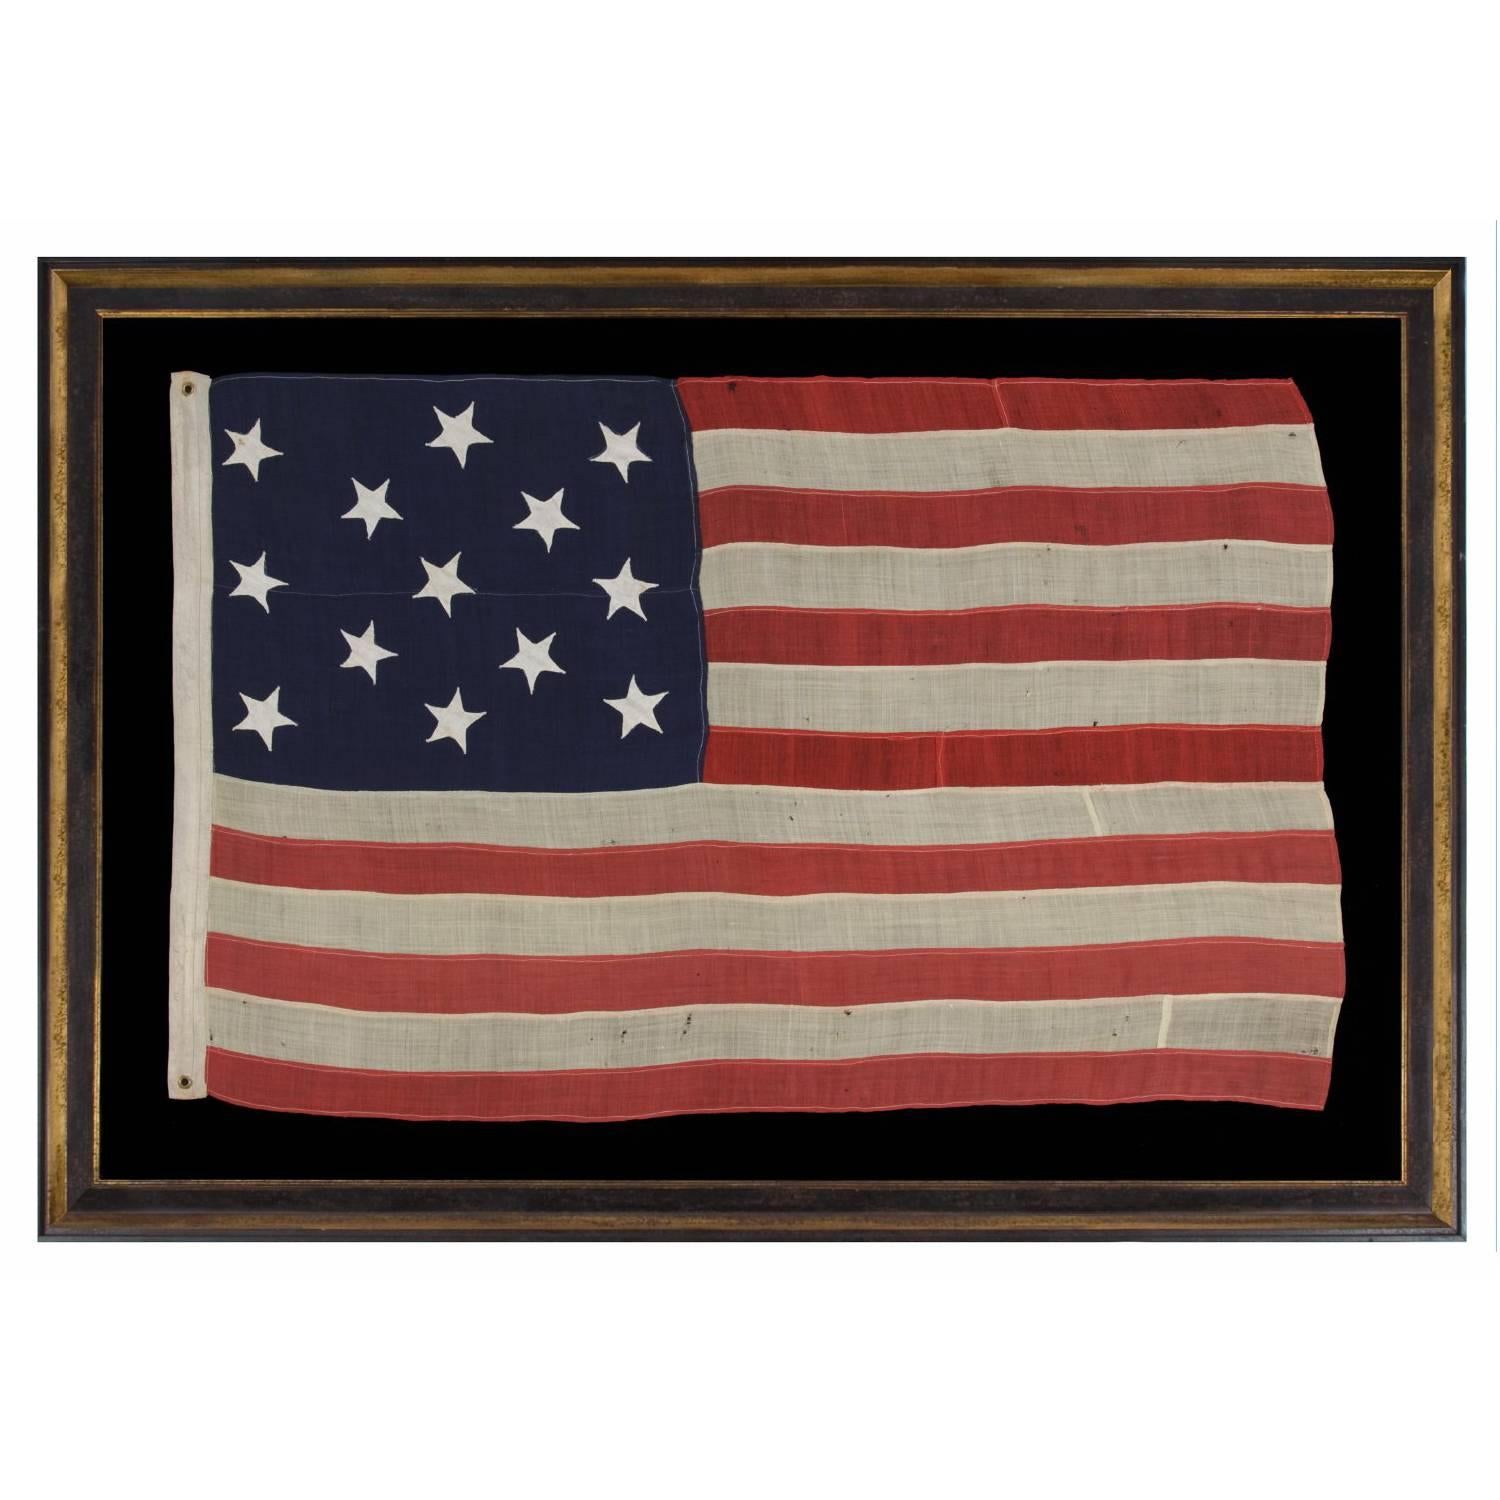 13 Hand-Sewn Stars on an Antique American Flag of the 1876 Era